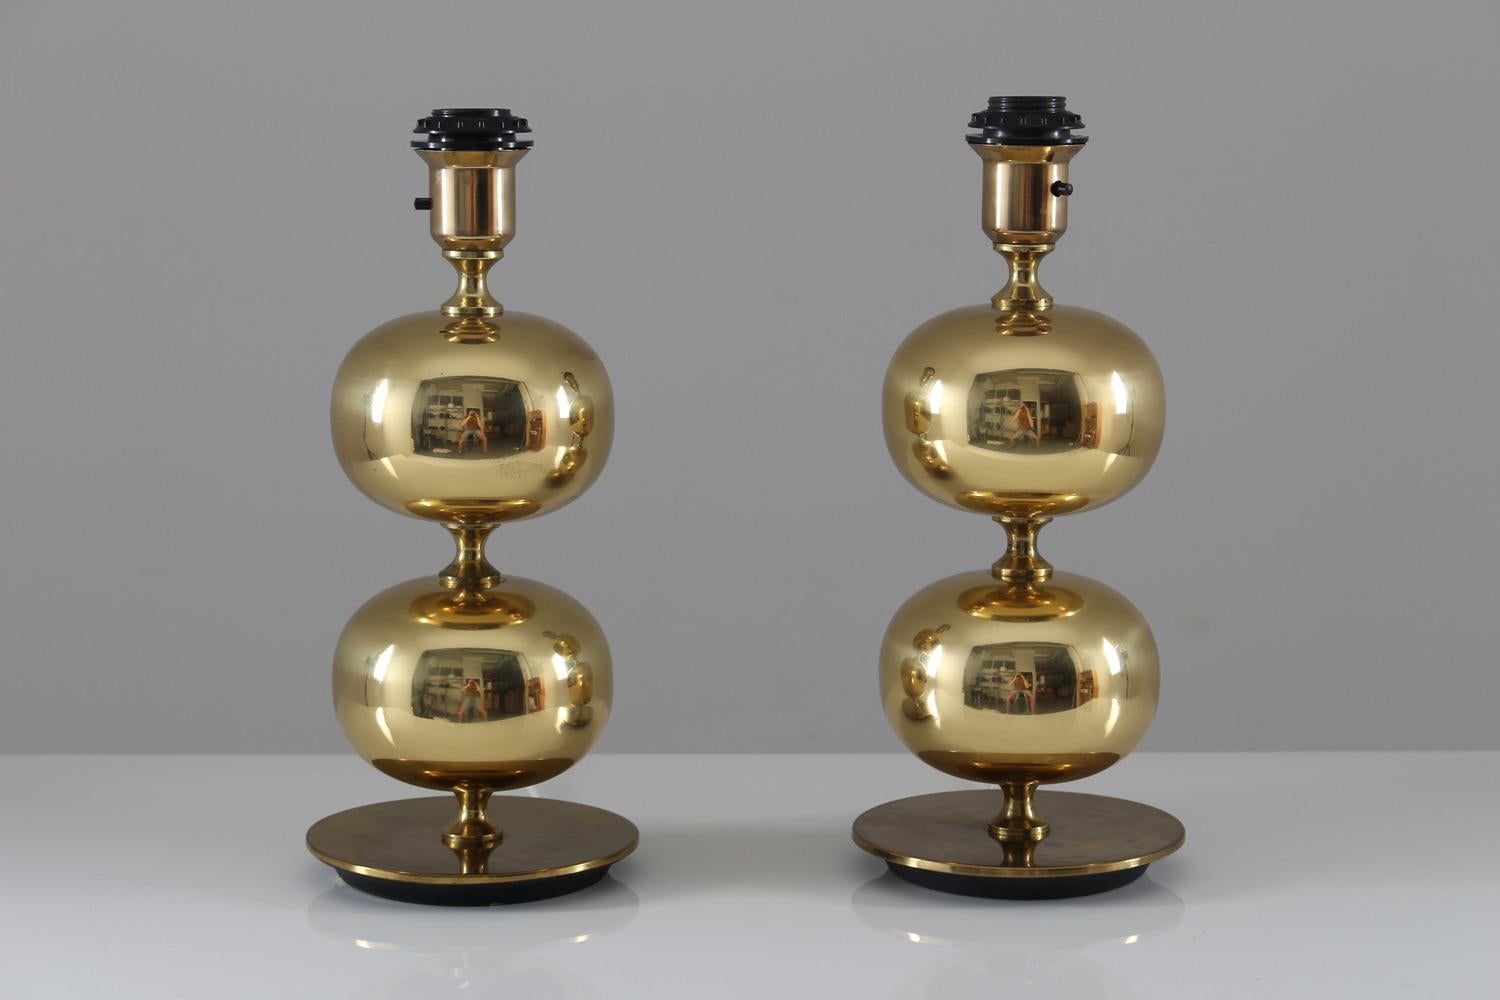 Two stunning midcentury table lamps by Stilarmatur Tranås, Sweden.
With a heavy bottom plate and two large brass spheres, these lamps give an exclusive impression.
The lamps seem to be produced in different years, as the underside of the foot